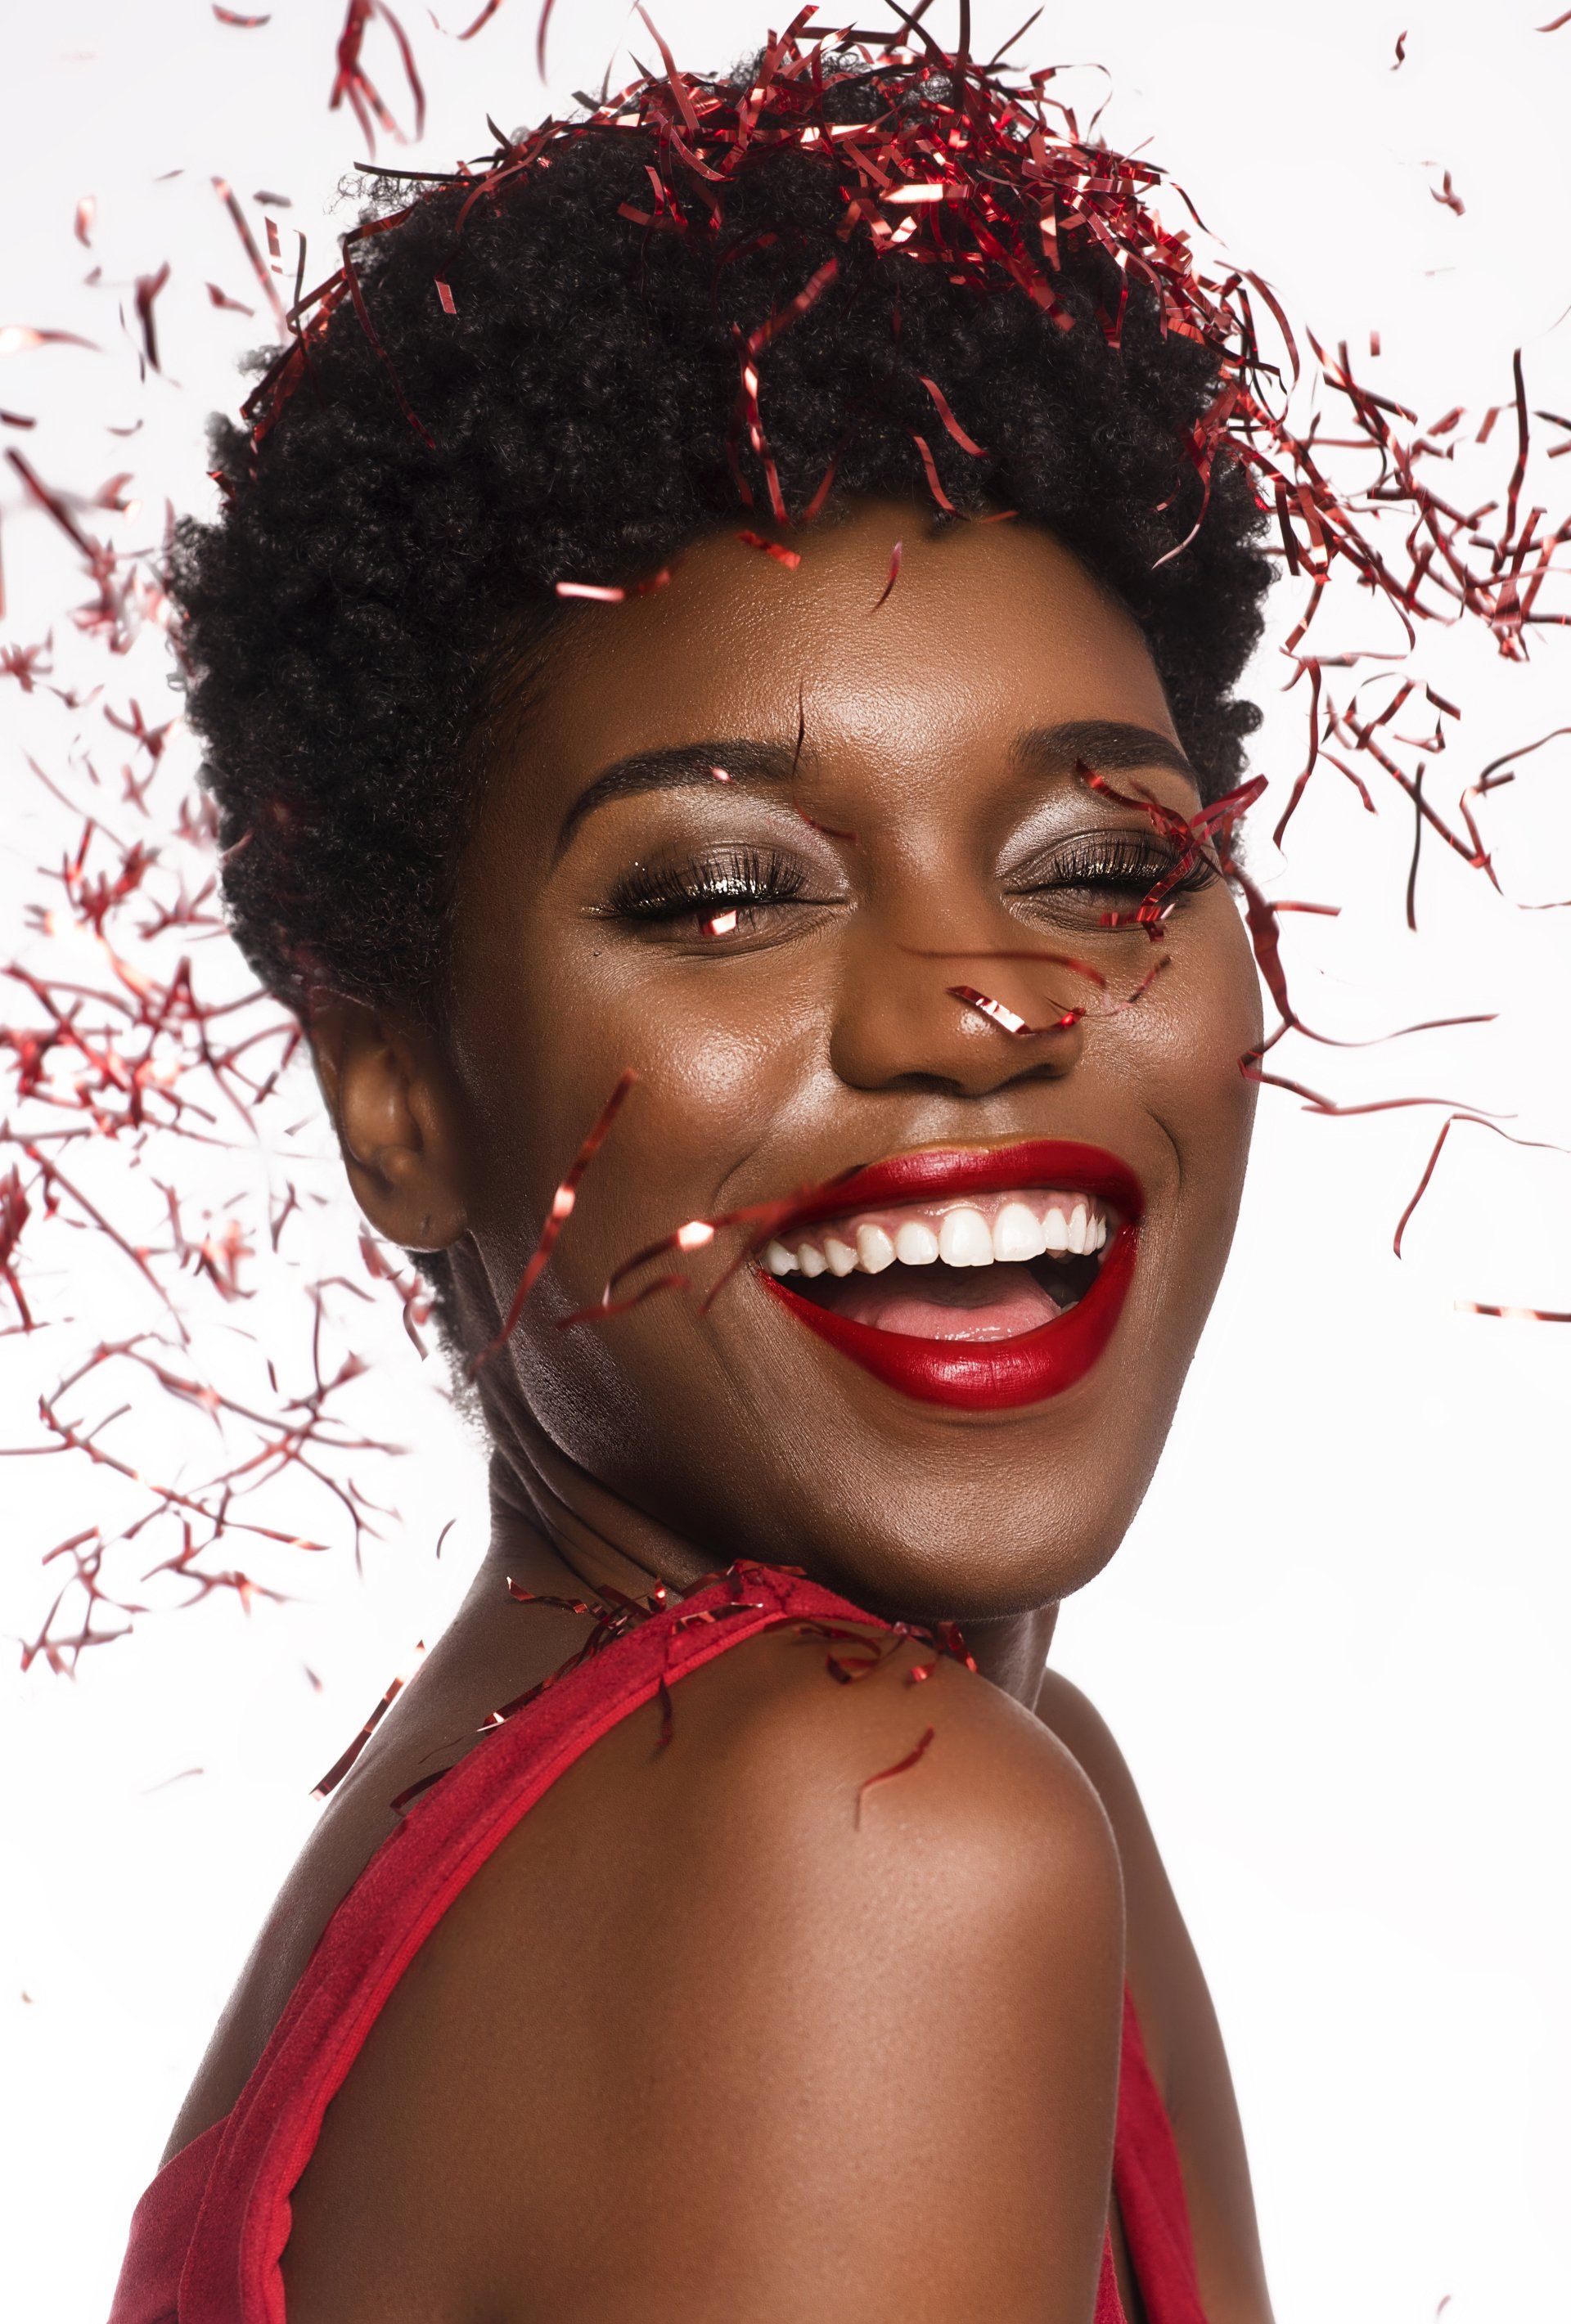 A woman with red lipstick and confetti on her face is smiling.